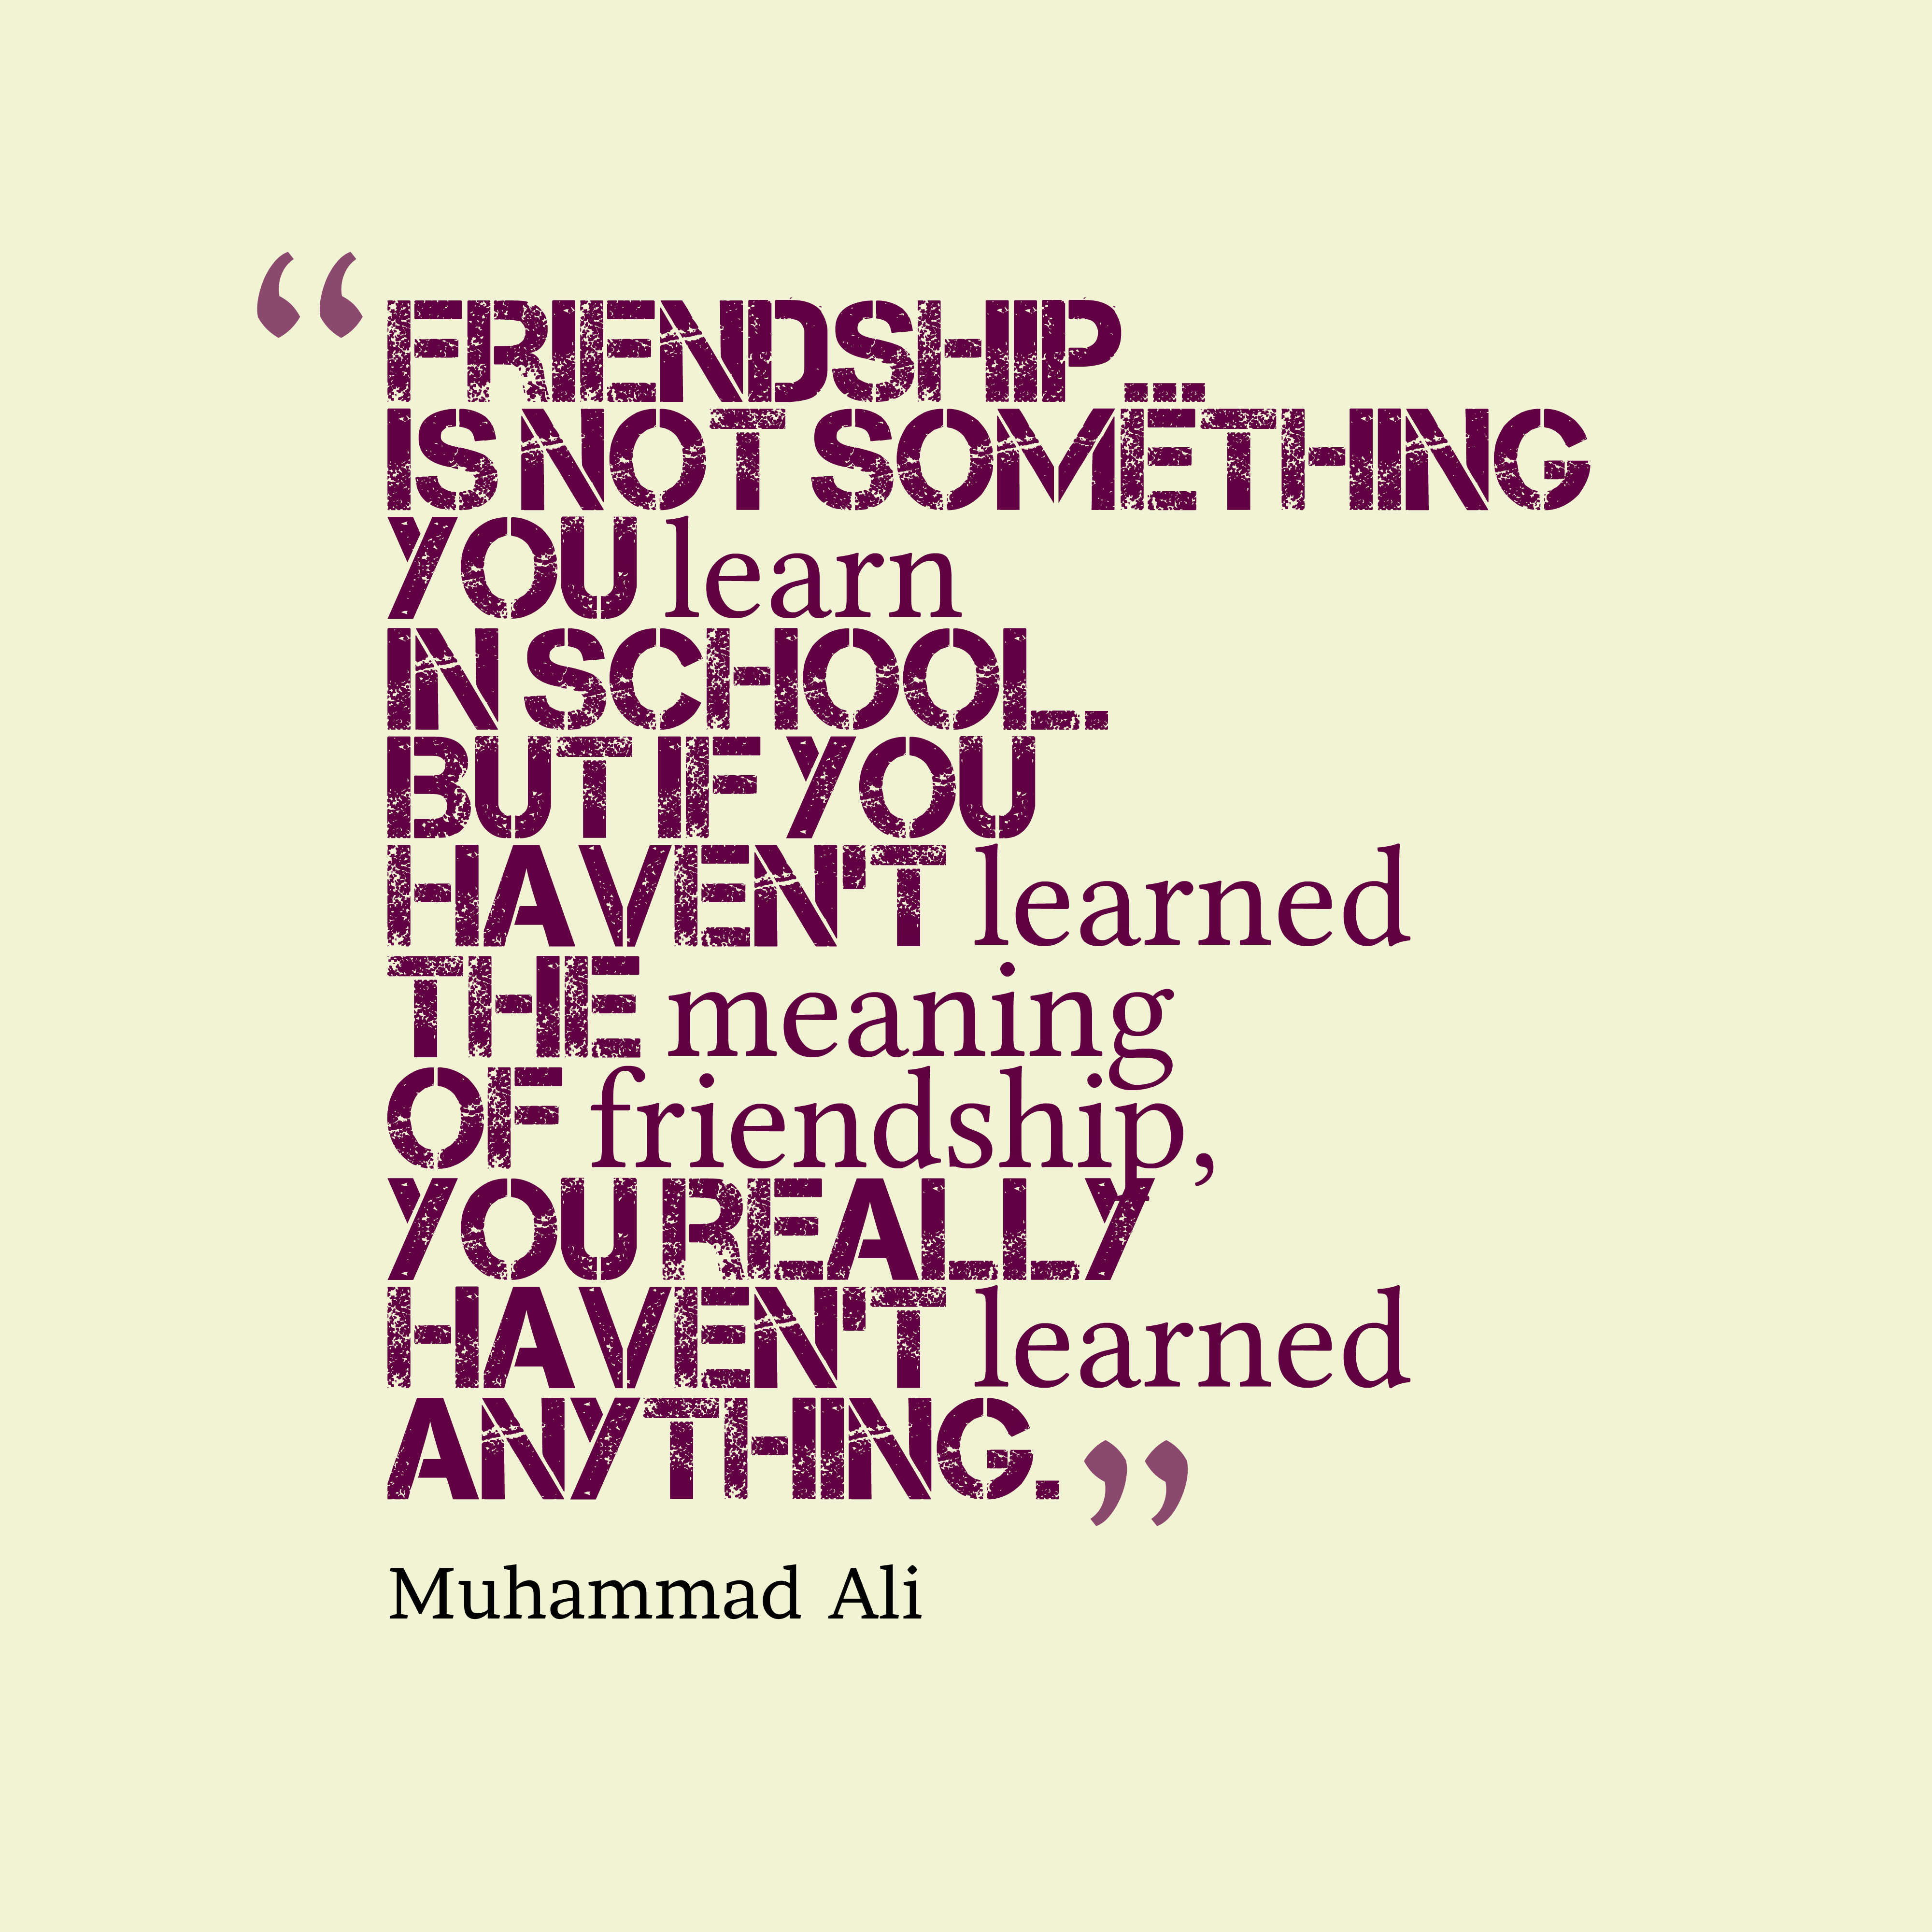 Image Result For Quotes About Friendship